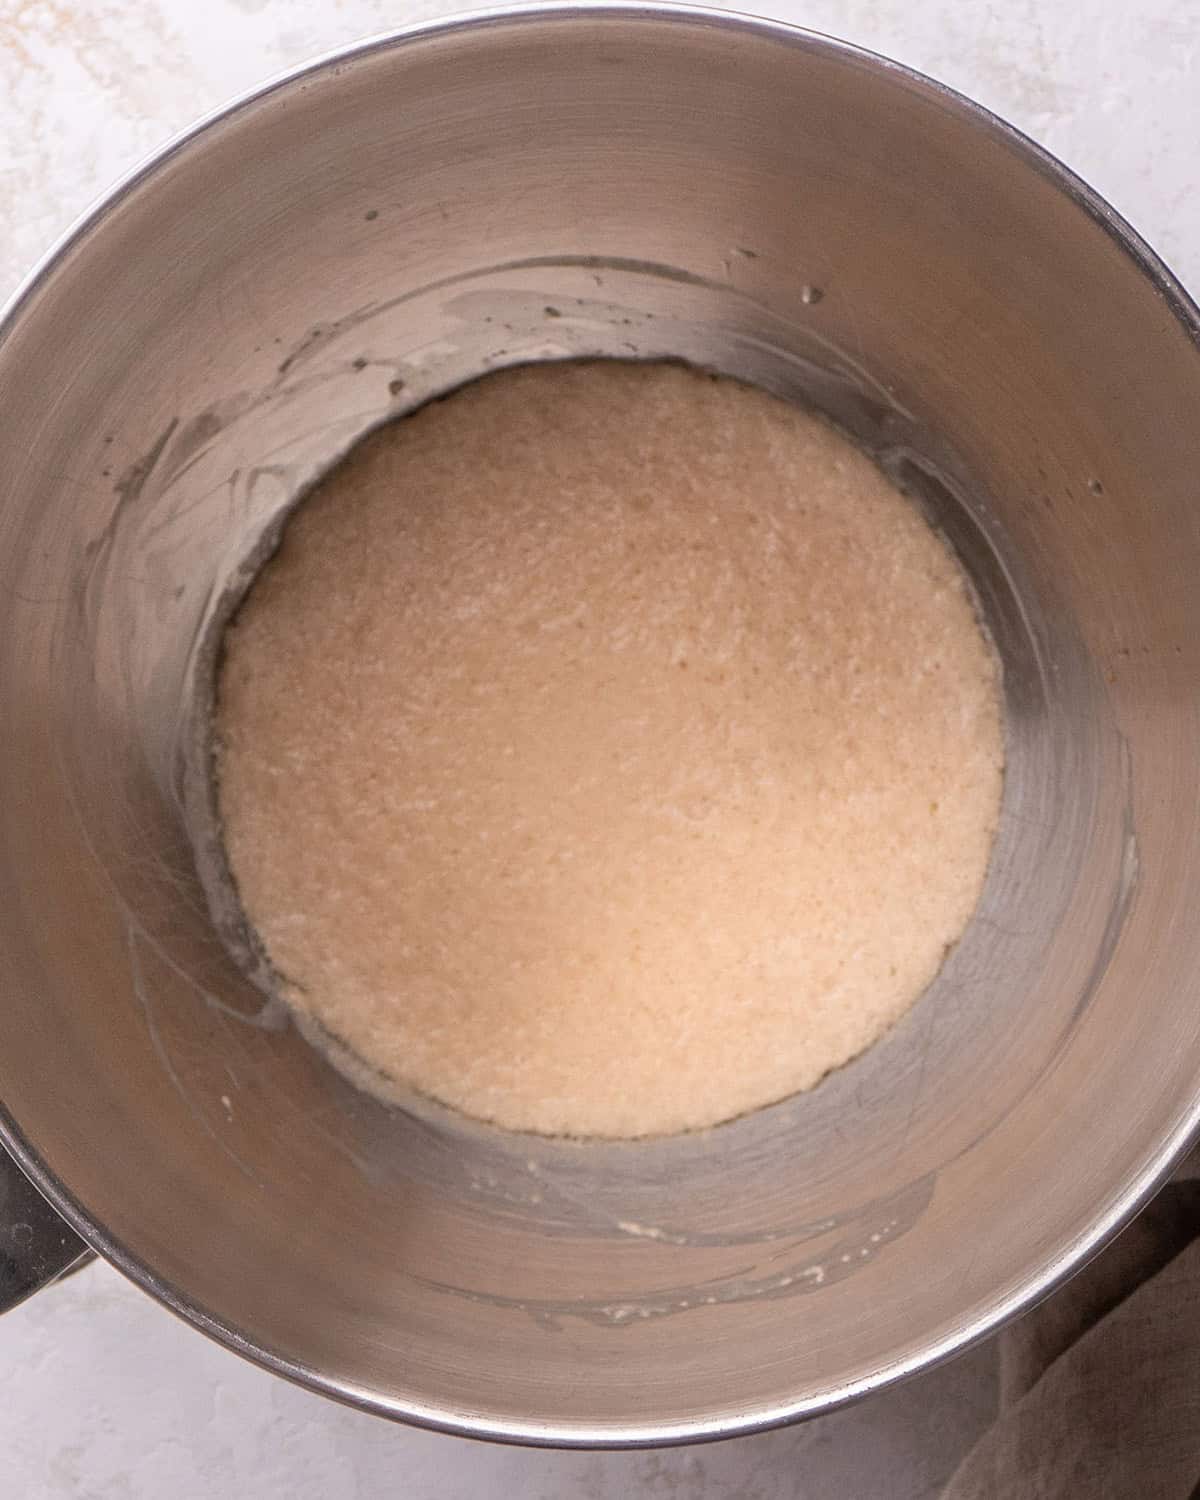 How to Make Honey Wheat Bread - proofed yeast in a bowl